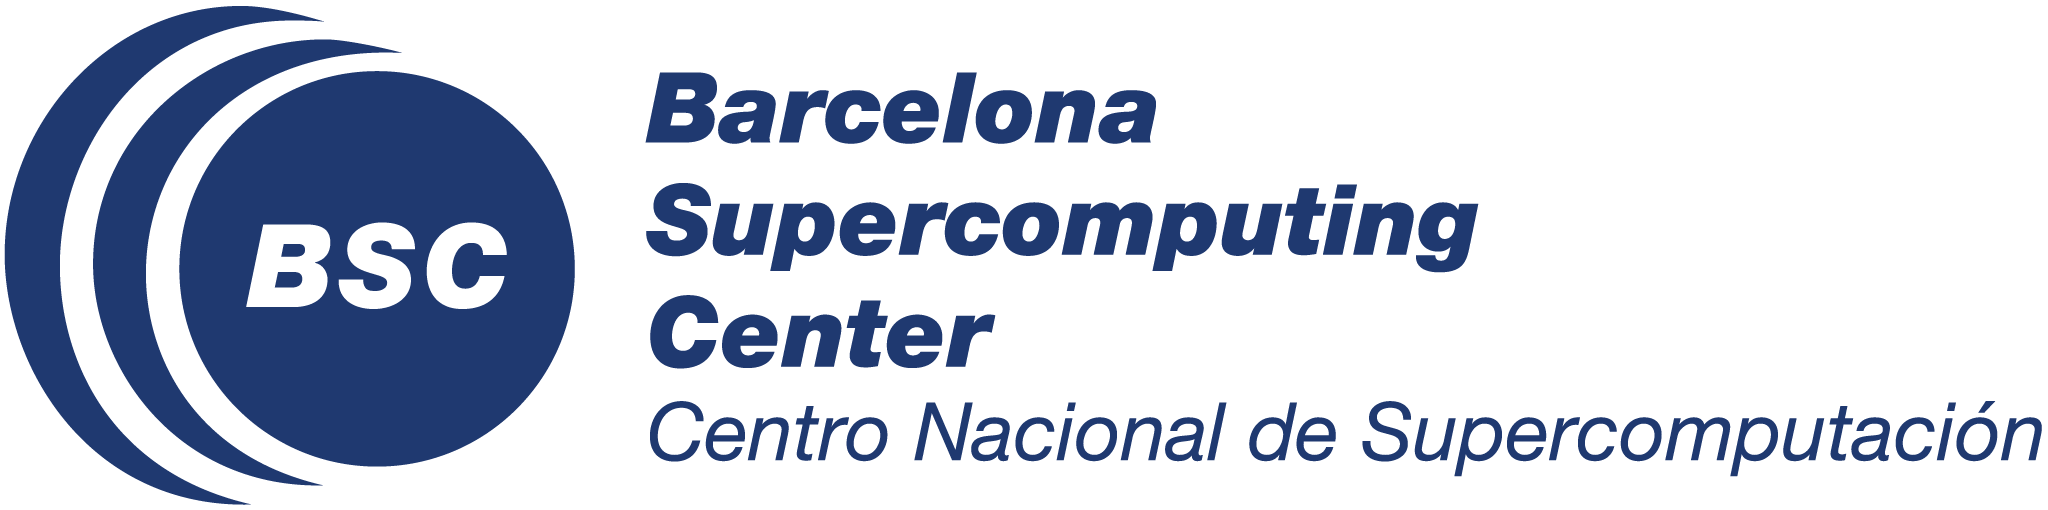 Exascale Supercomputer Software Container Engineer (RE1)